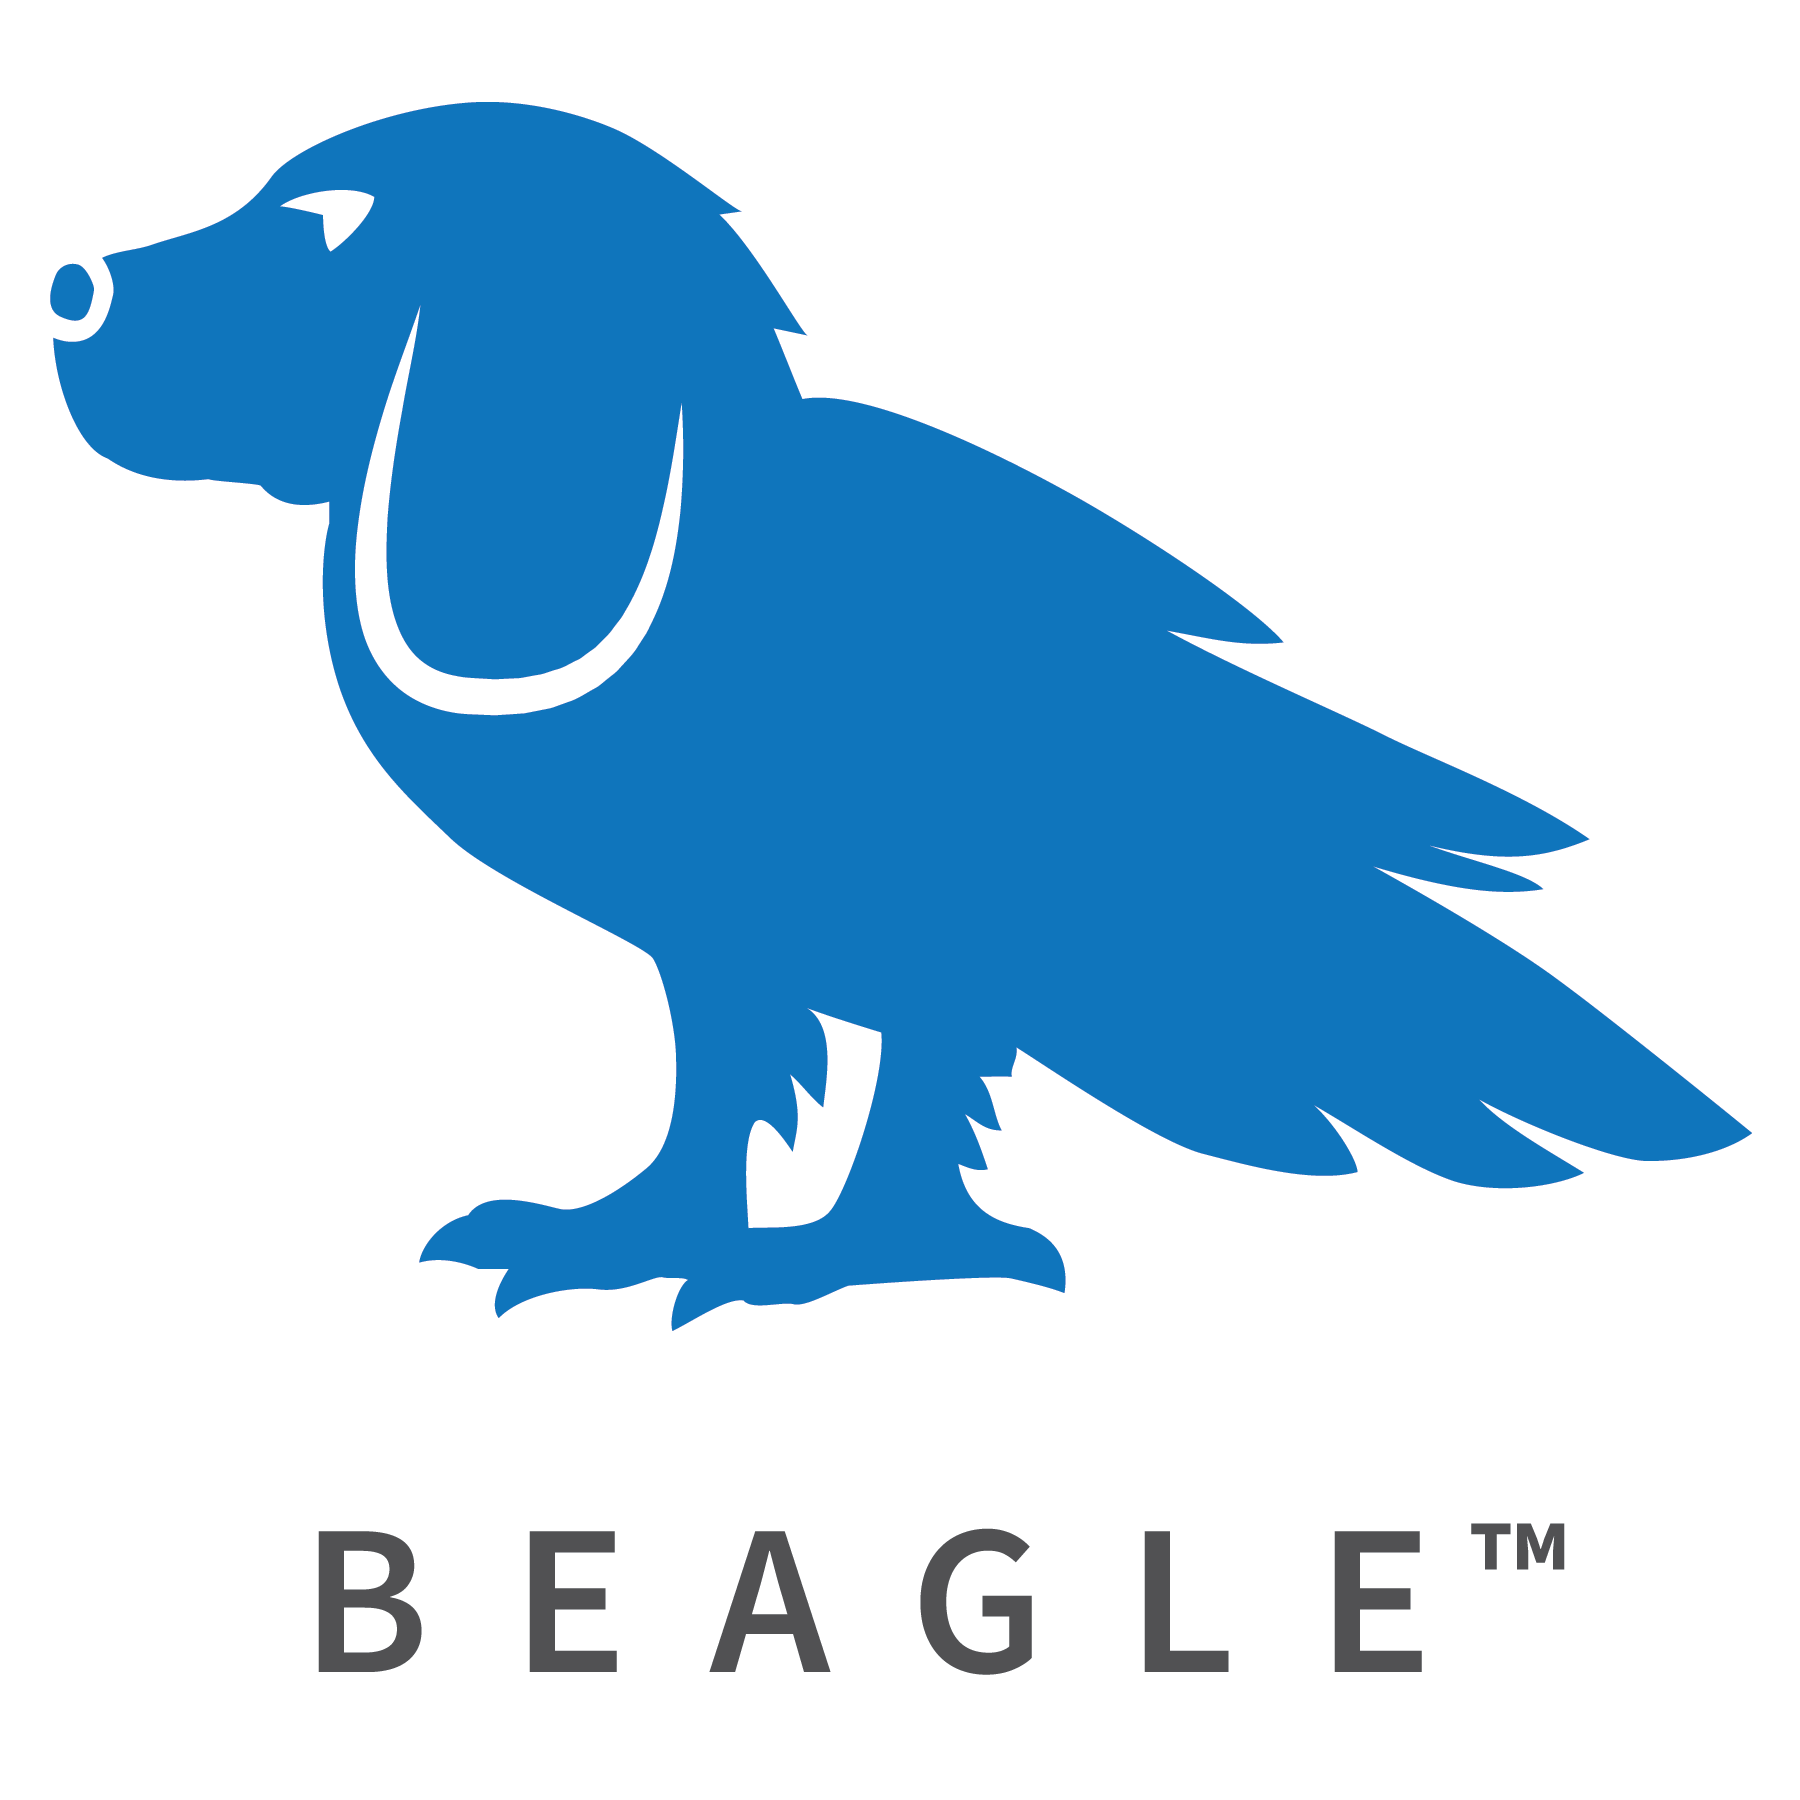 Beagle™ logo design by logo designer Stressdesign for your inspiration and for the worlds largest logo competition